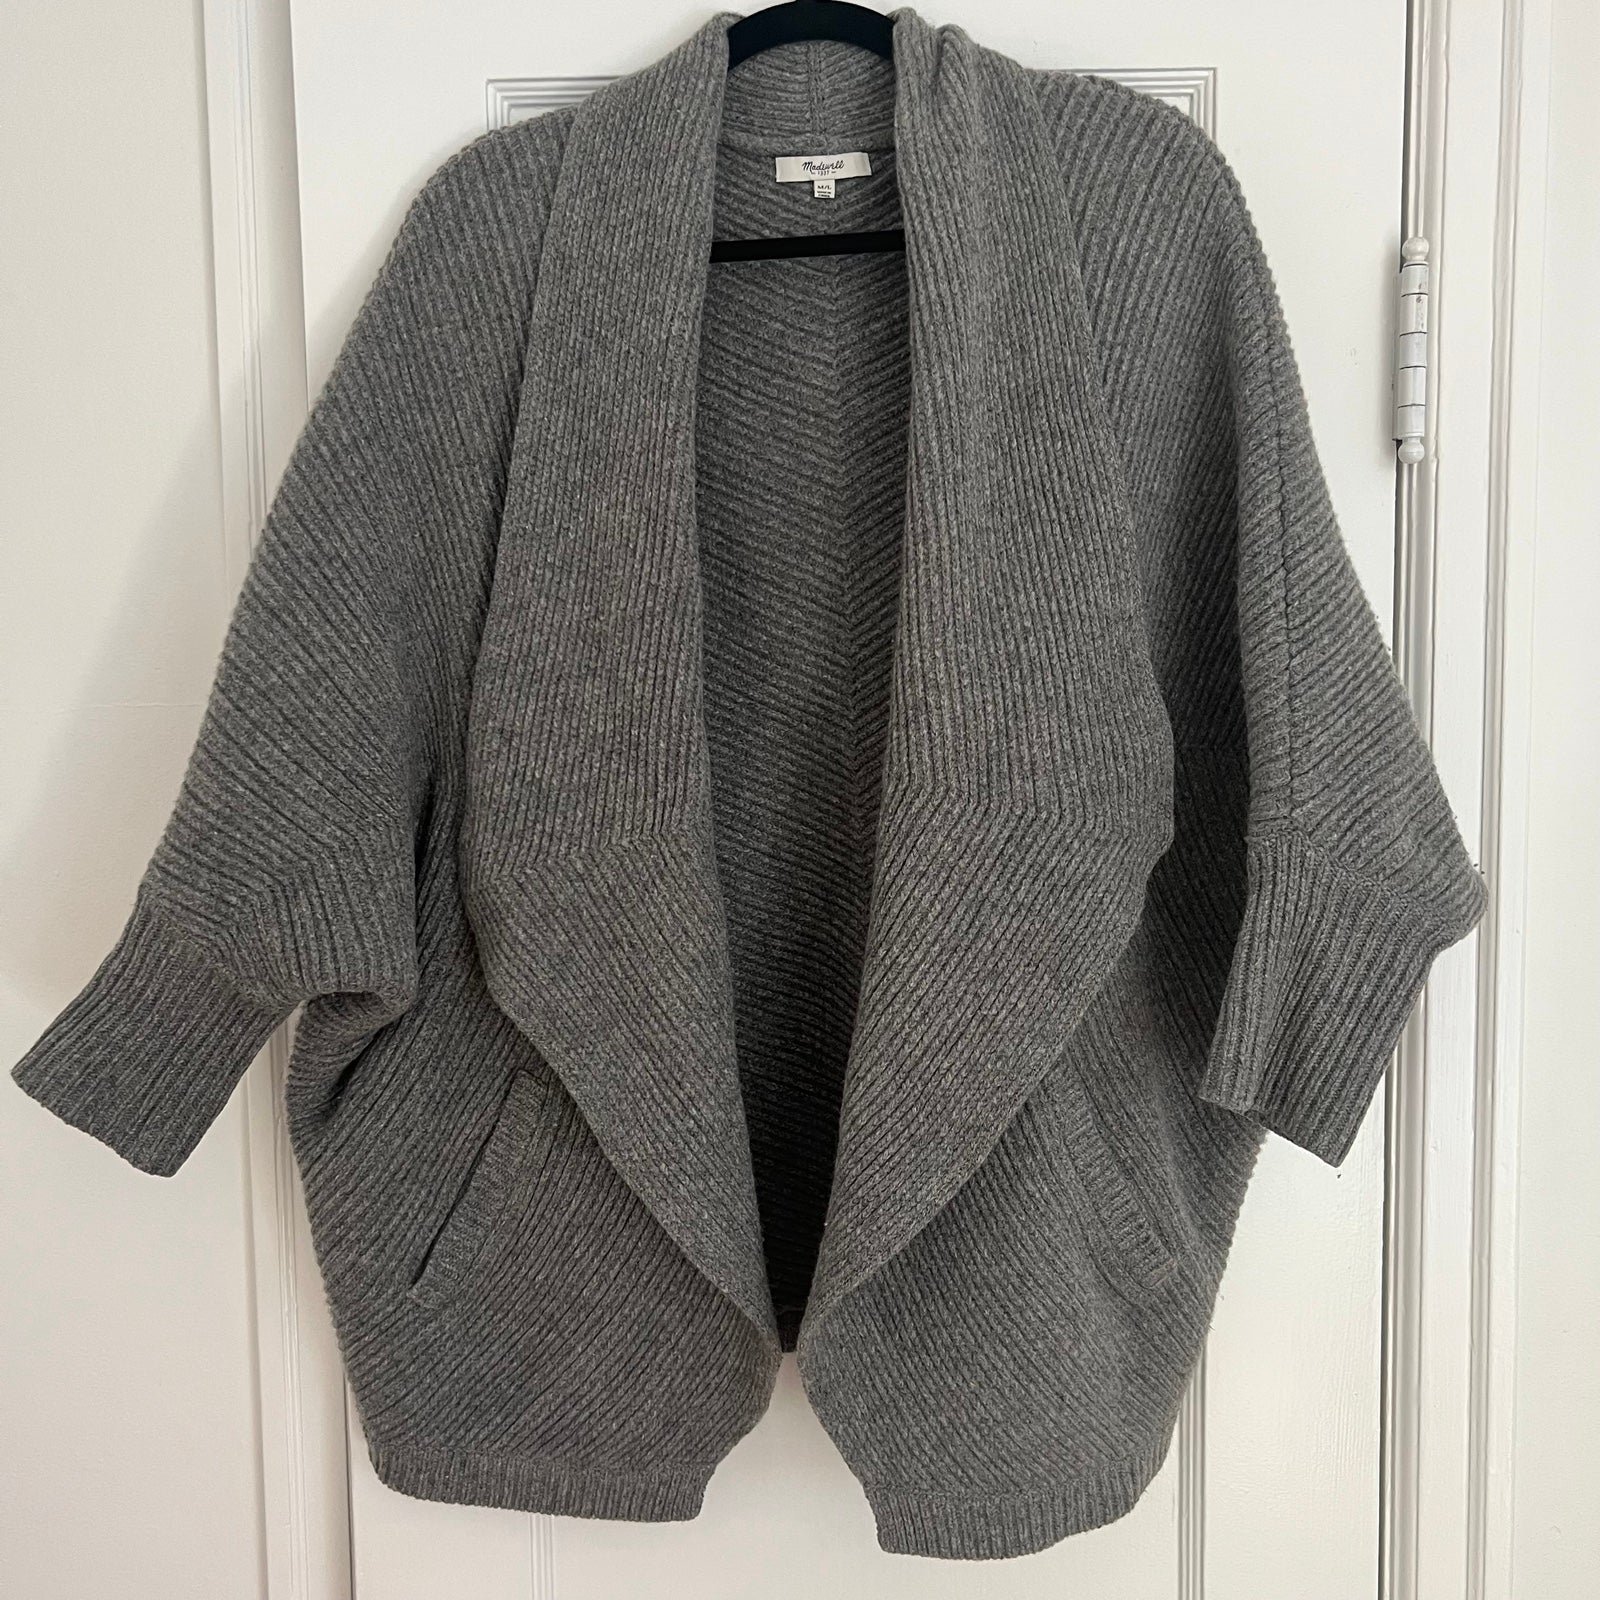 Authentic Madewell Sculptor Cocoon Cardigan Wool Sweate